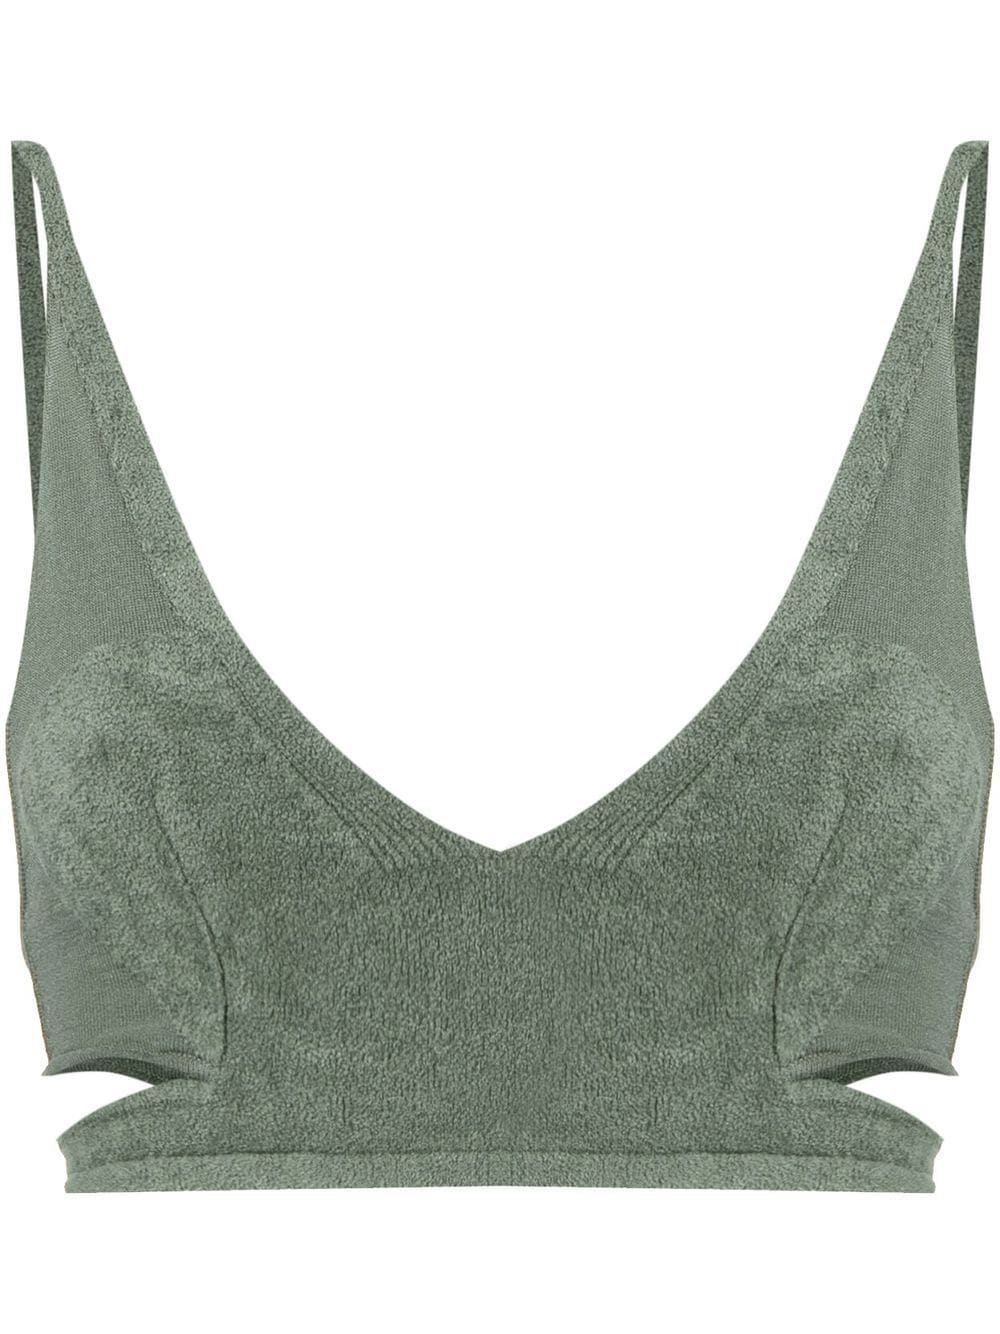 Dion Lee Chenille intarsia bralette top - Green